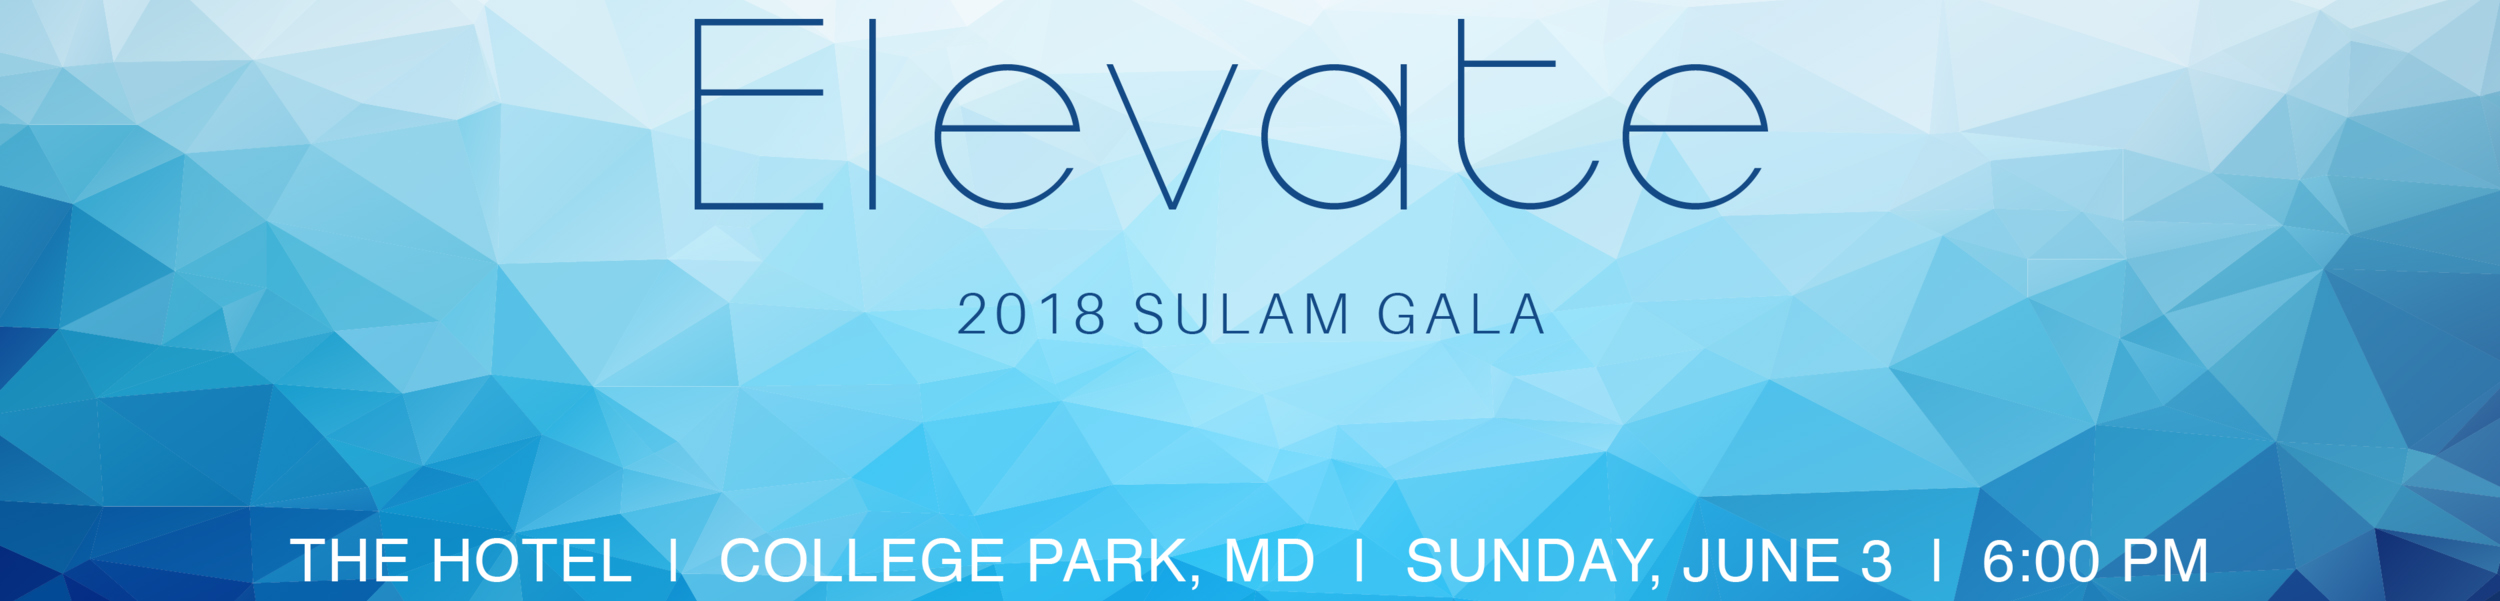 Text reads "Elevate 2018 Sulam Gala The Hotel | College Park, MD | Sunday, June 3 | 6:00 PM